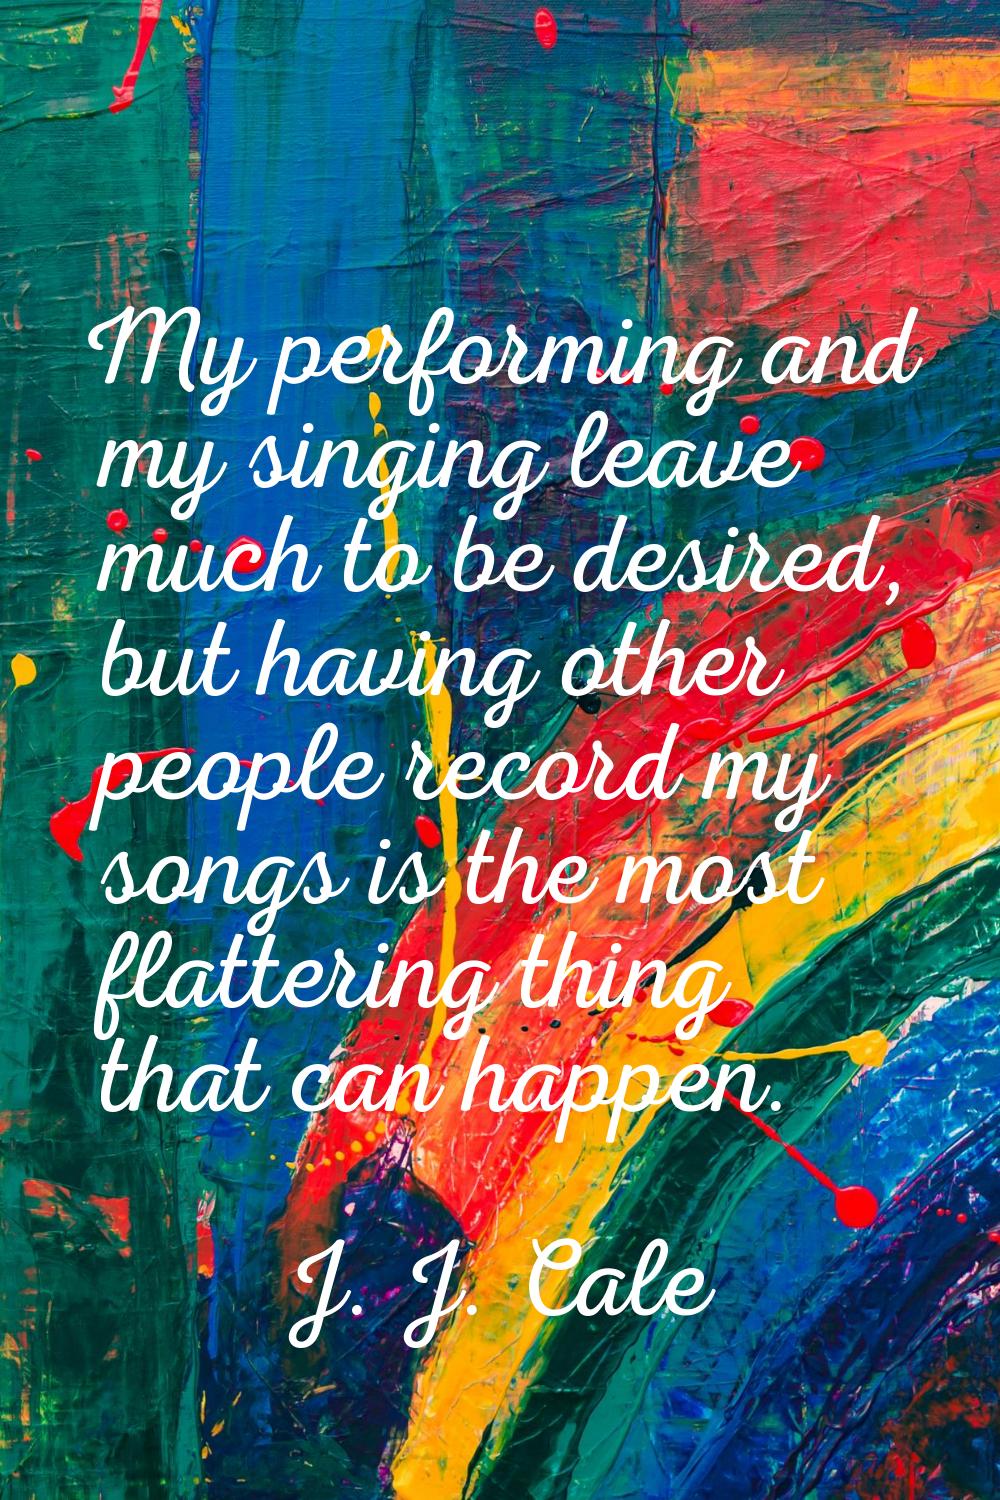 My performing and my singing leave much to be desired, but having other people record my songs is t